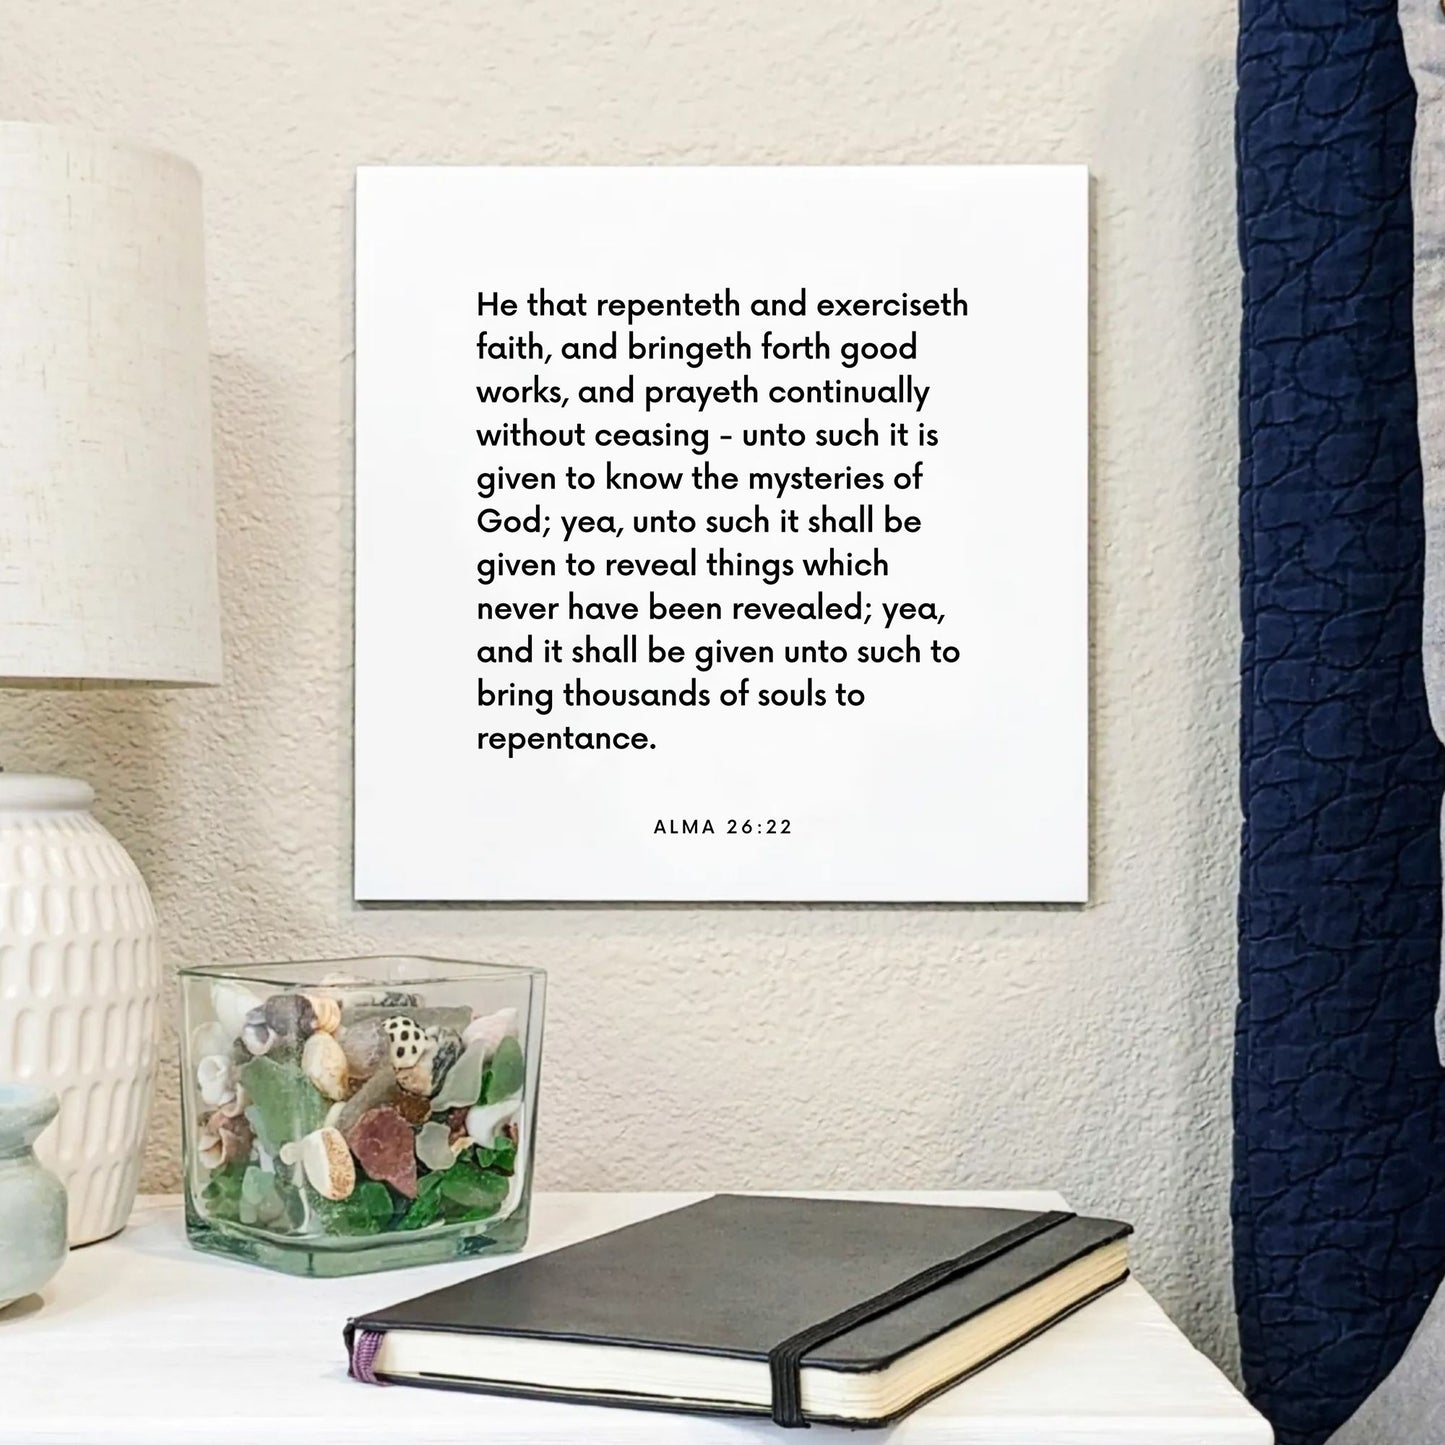 Bedside mouting of the scripture tile for Alma 26:22 - "He that repenteth and exerciseth faith"